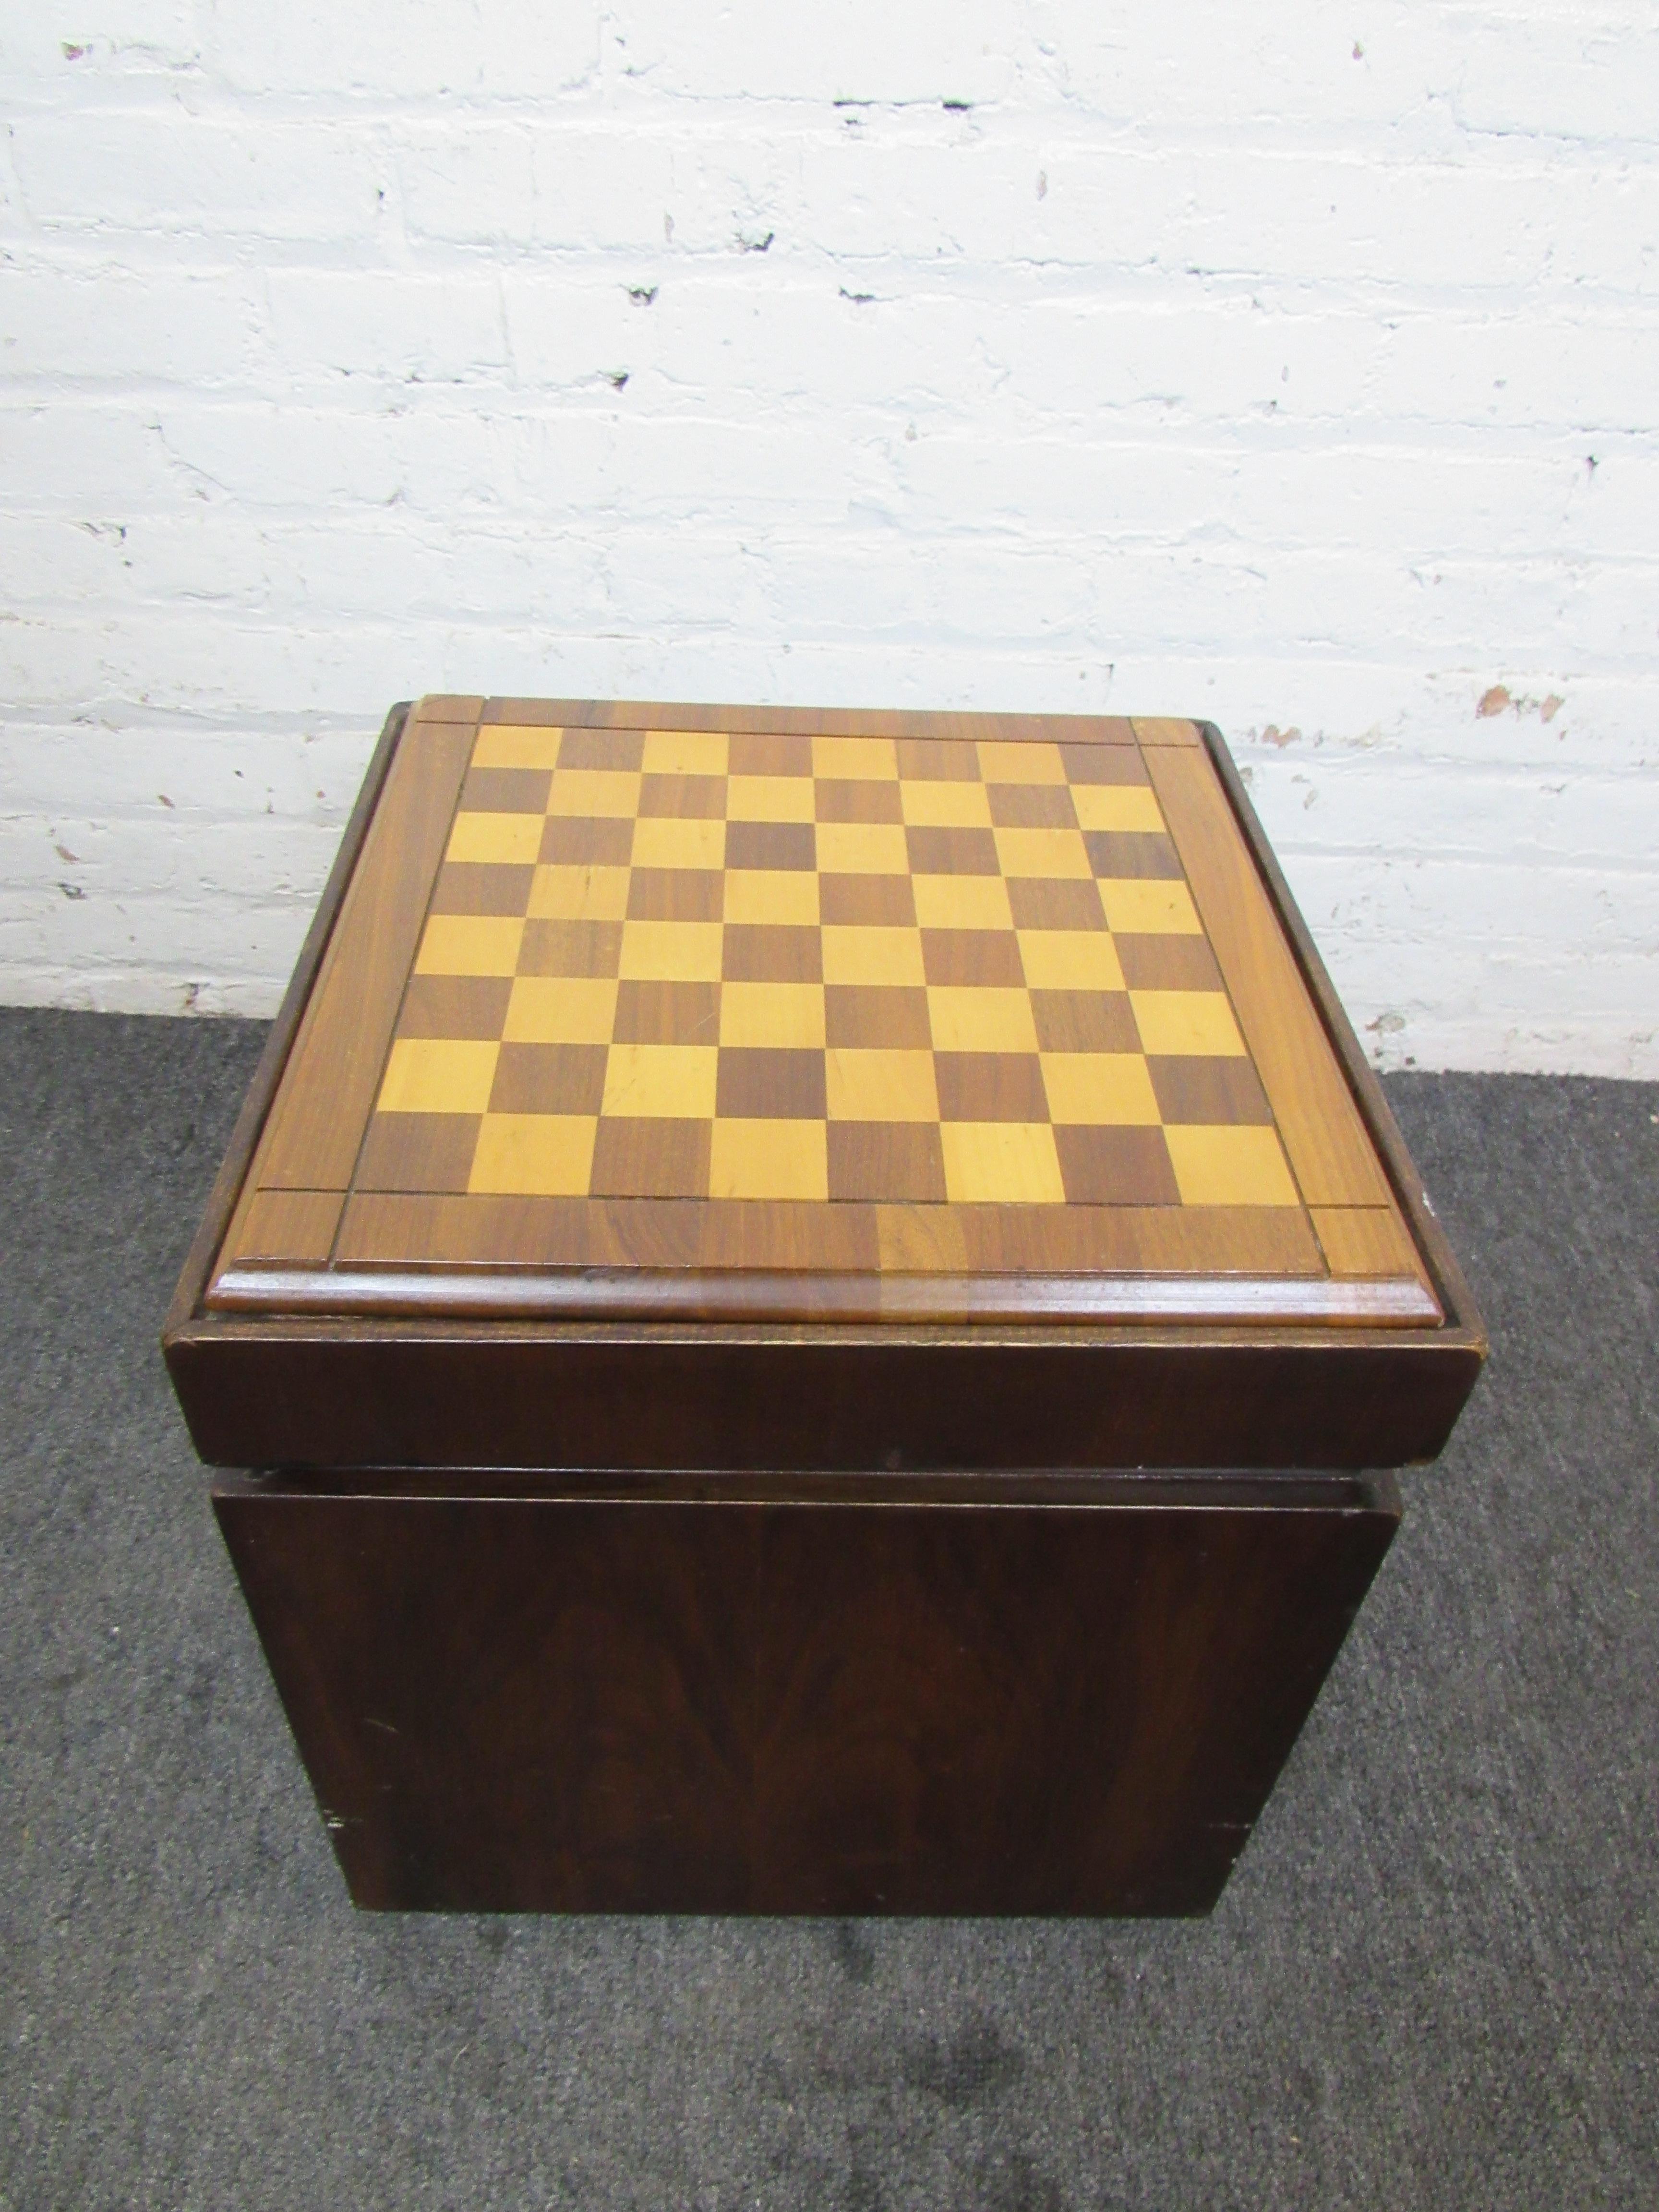 Unusual stow away box with chess board top, which is removable. Box can fit other board games inside.
Please confirm location (NY or NJ).